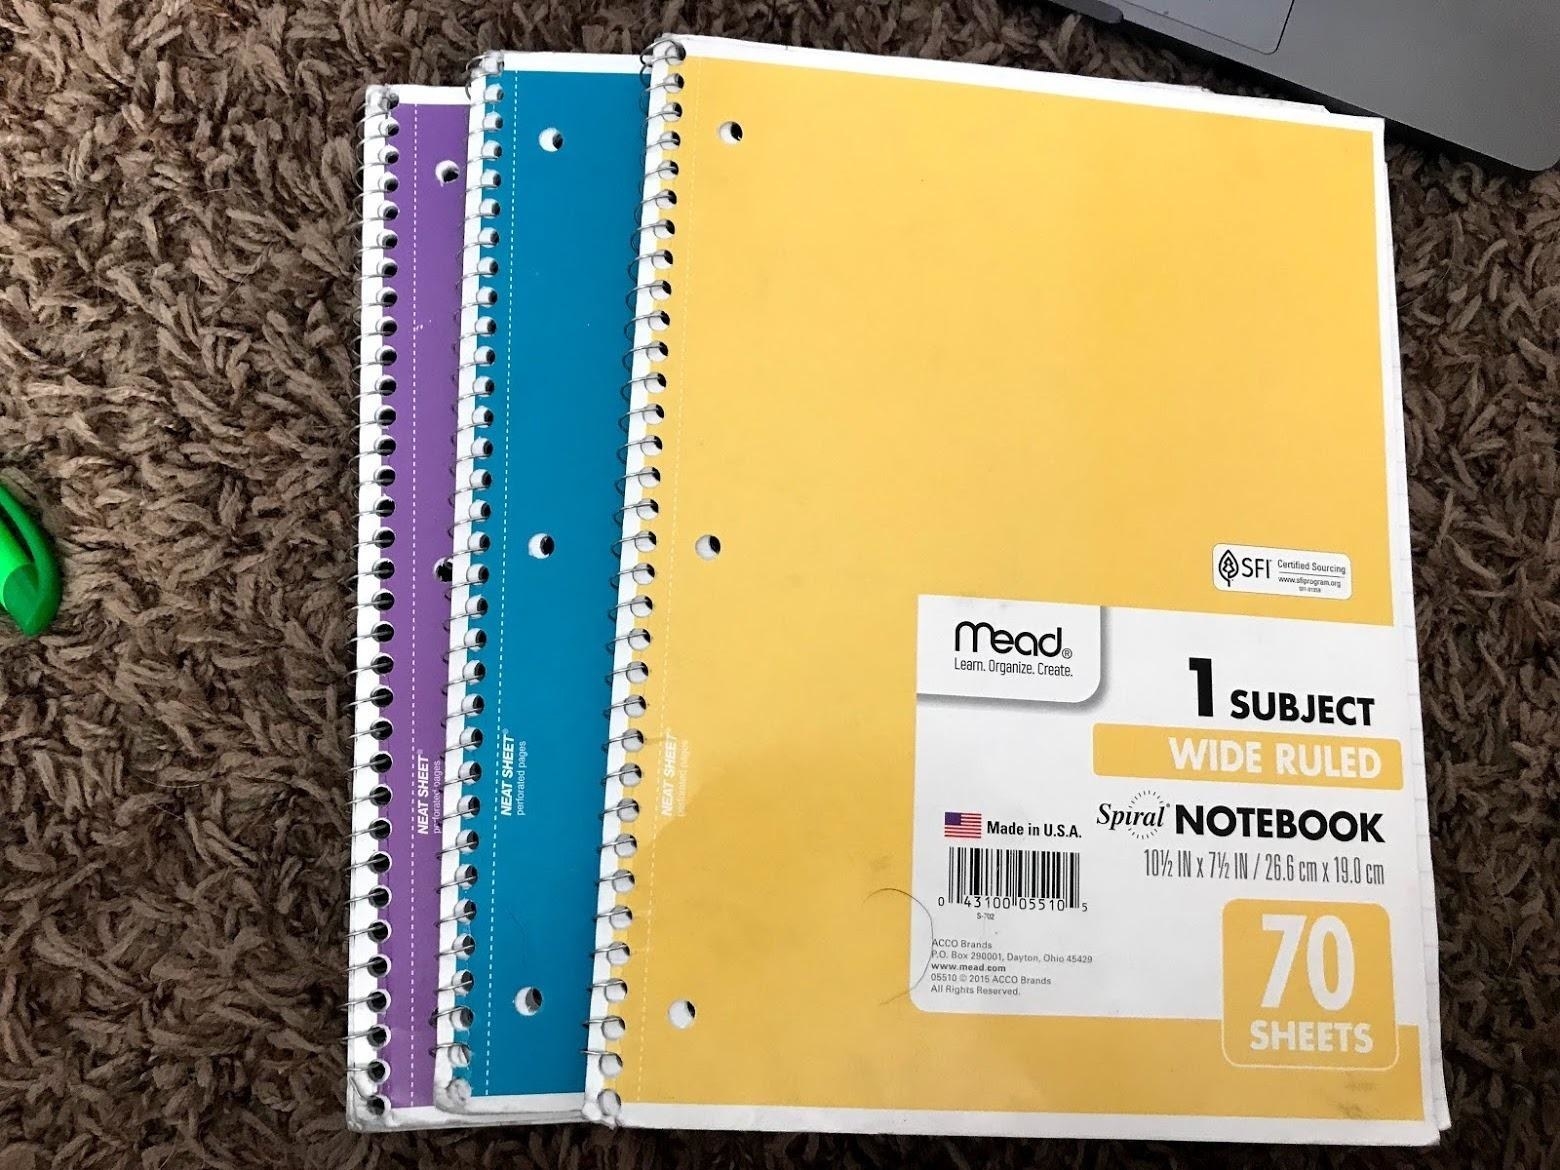 reviewer image of the notebooks